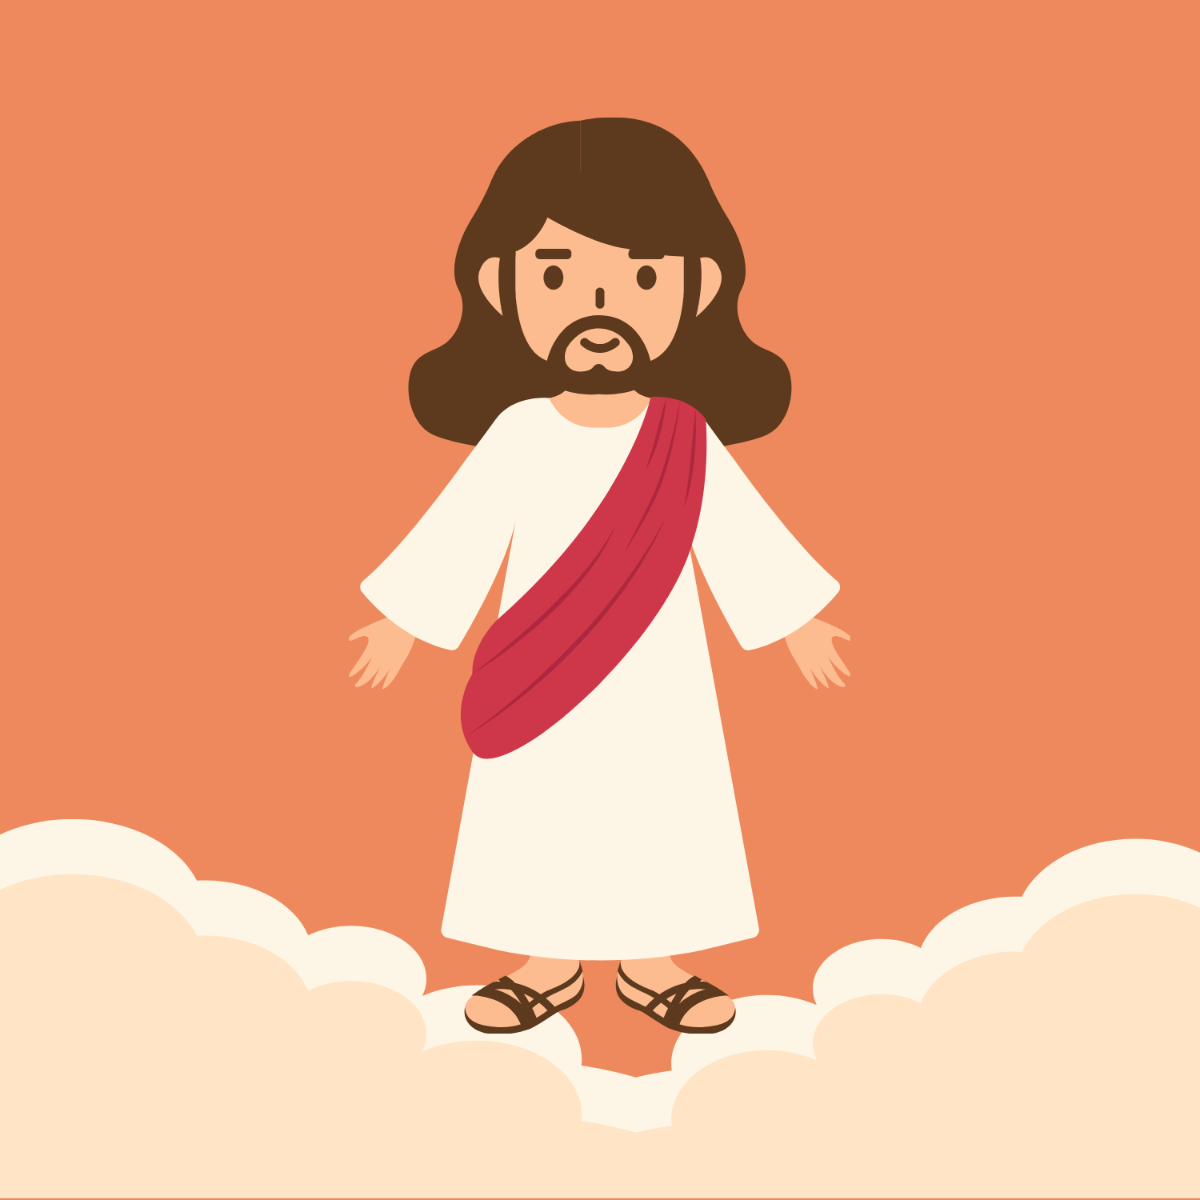 Free Ascension Day Vector Template